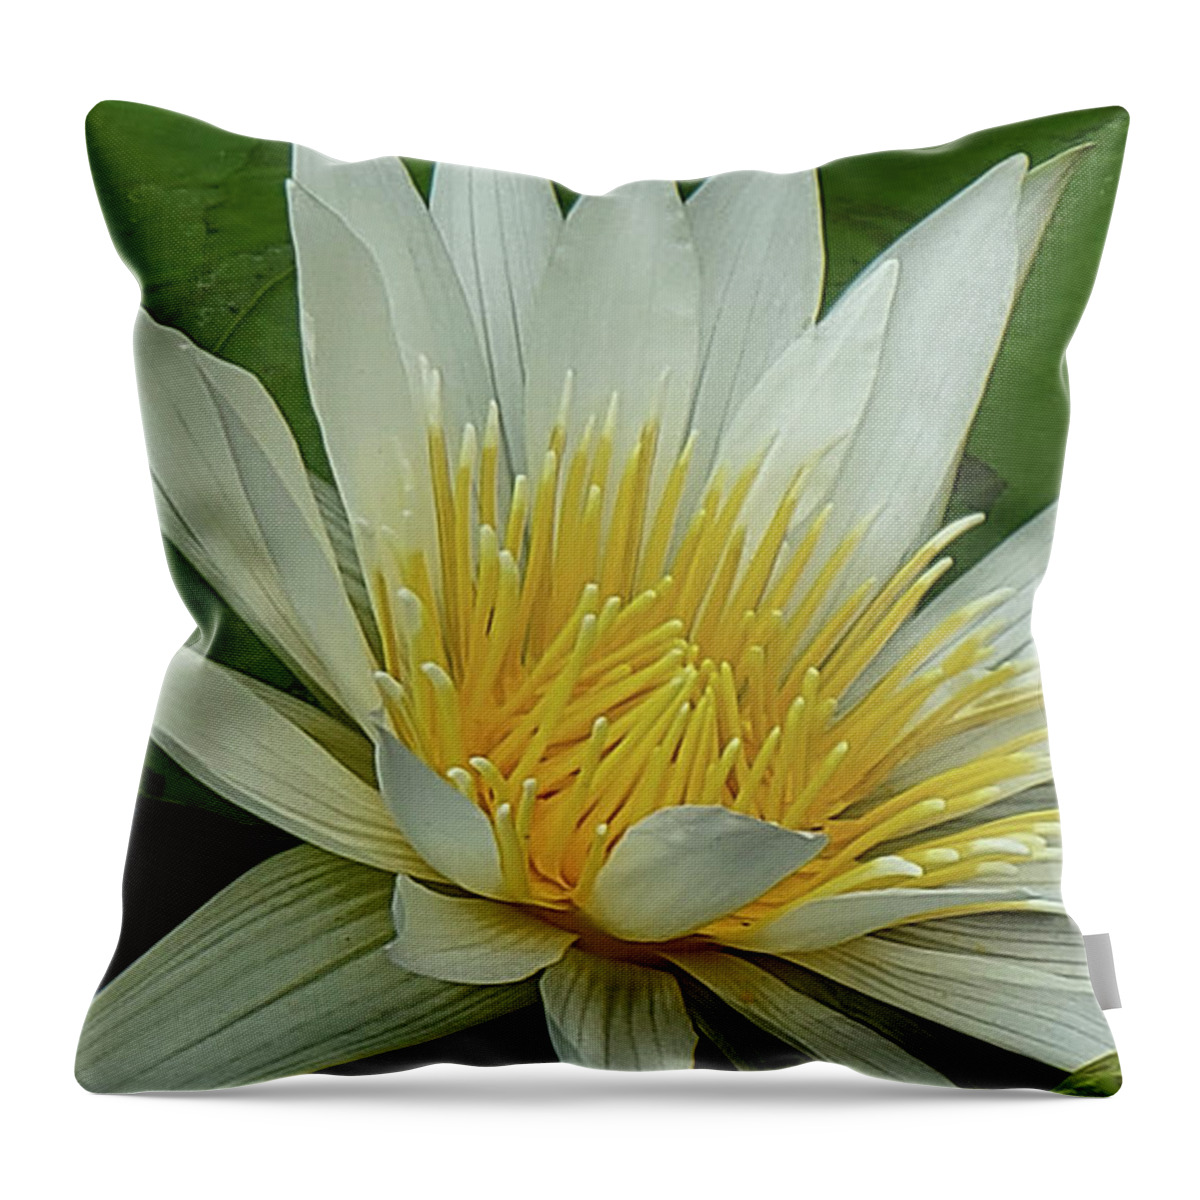 Art Throw Pillow featuring the photograph White Water Lily by Jeannie Rhode